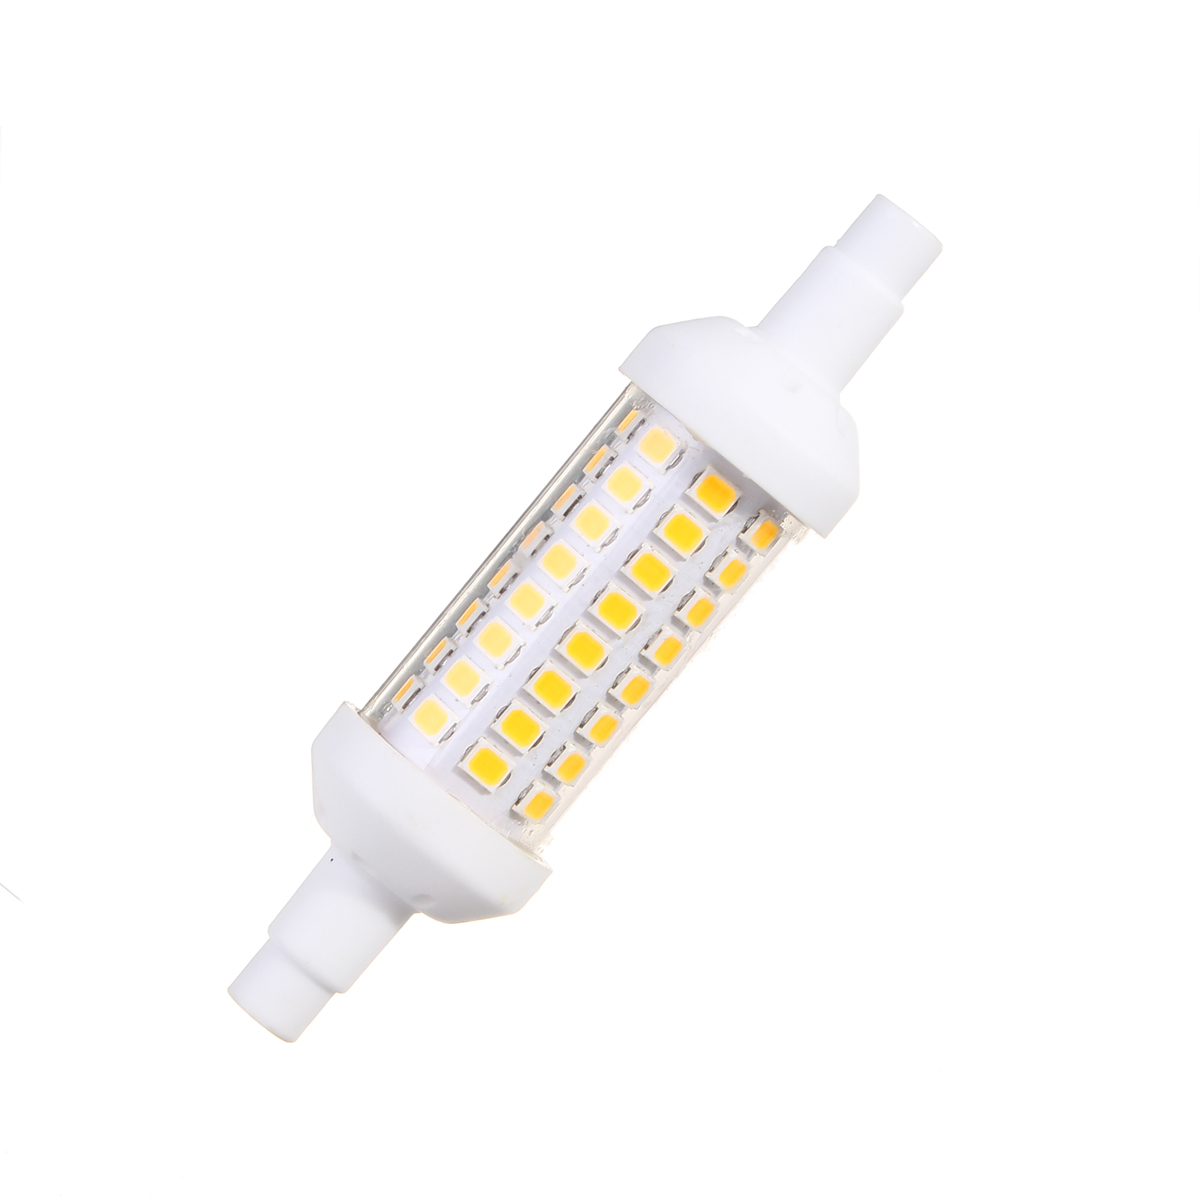 6W-R7S-2835-SMD-Non-dimmable-LED-Flood-Light-Replaces-Halogen-Lamp-Ceramics--High-Bright-AC220-265V-1282825-2